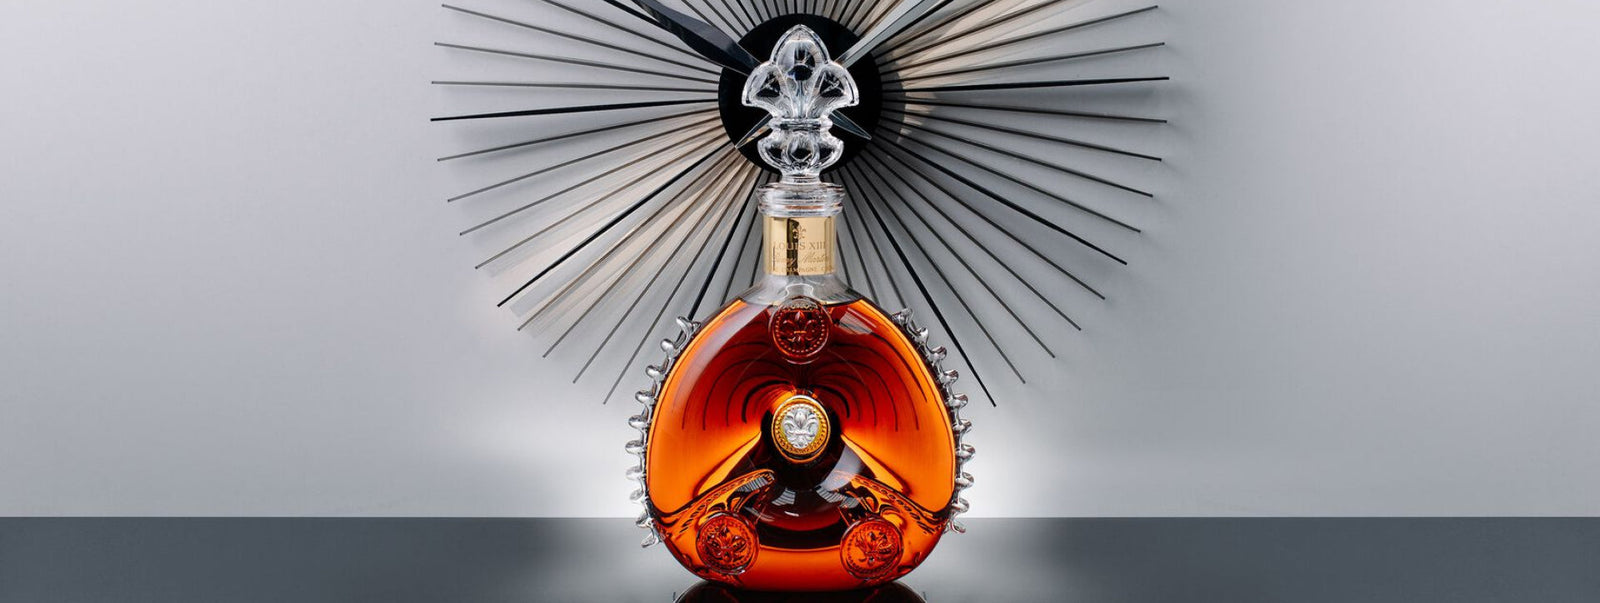 A lifestyle photo of LOUIS XIII decanter on a black surface with a black modent clock behind